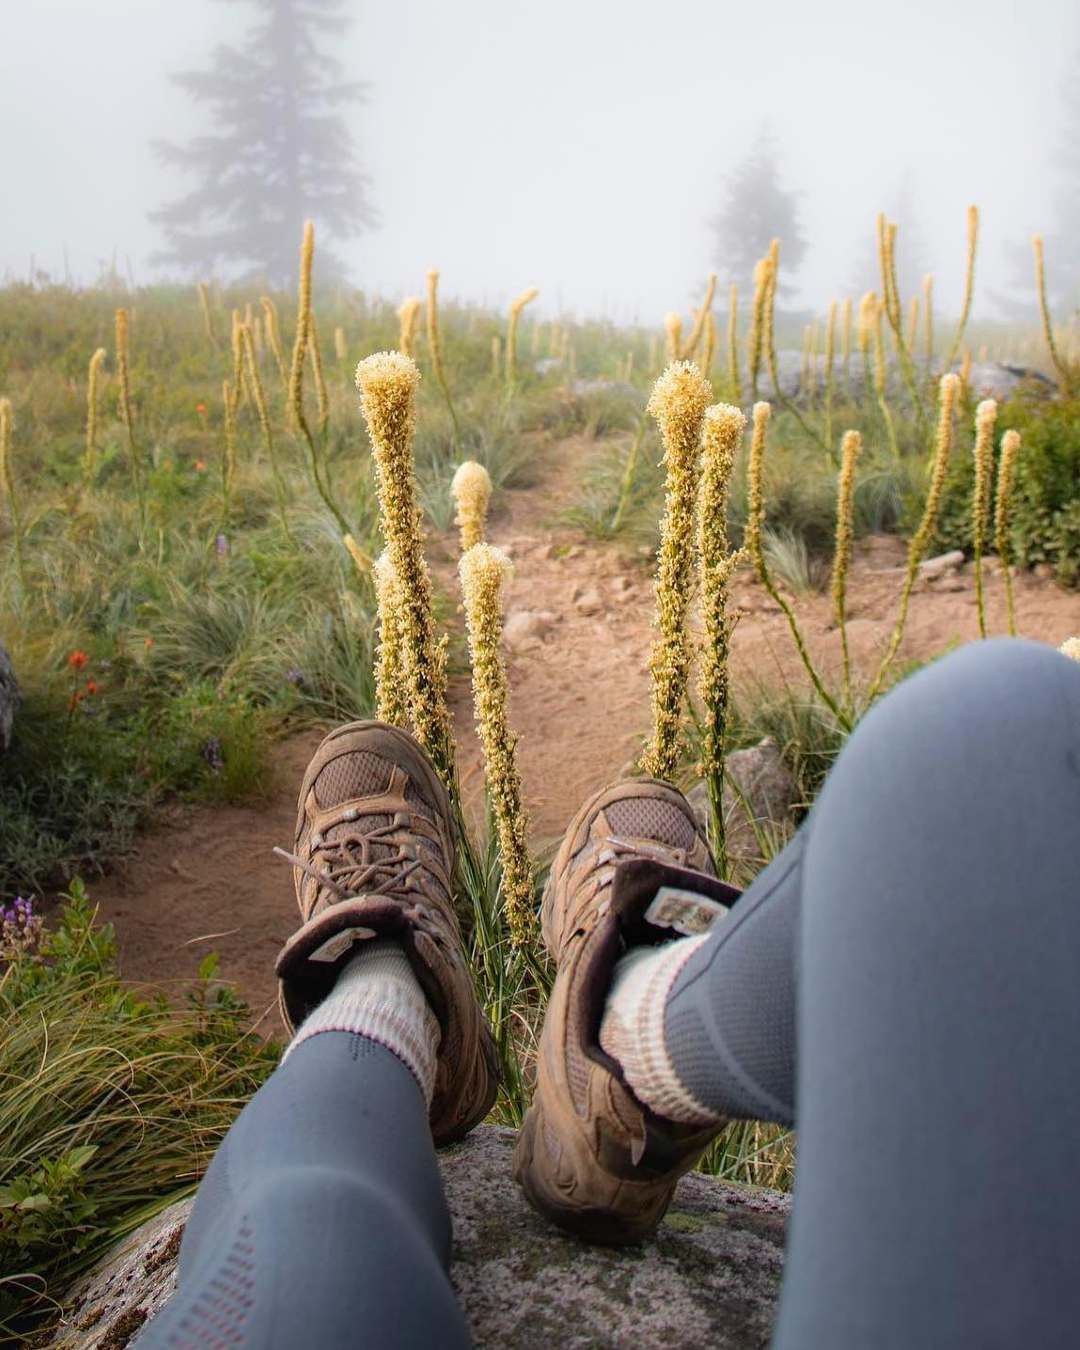 Legs are stretched out in front of the camera wearing socks and hiking shoes.